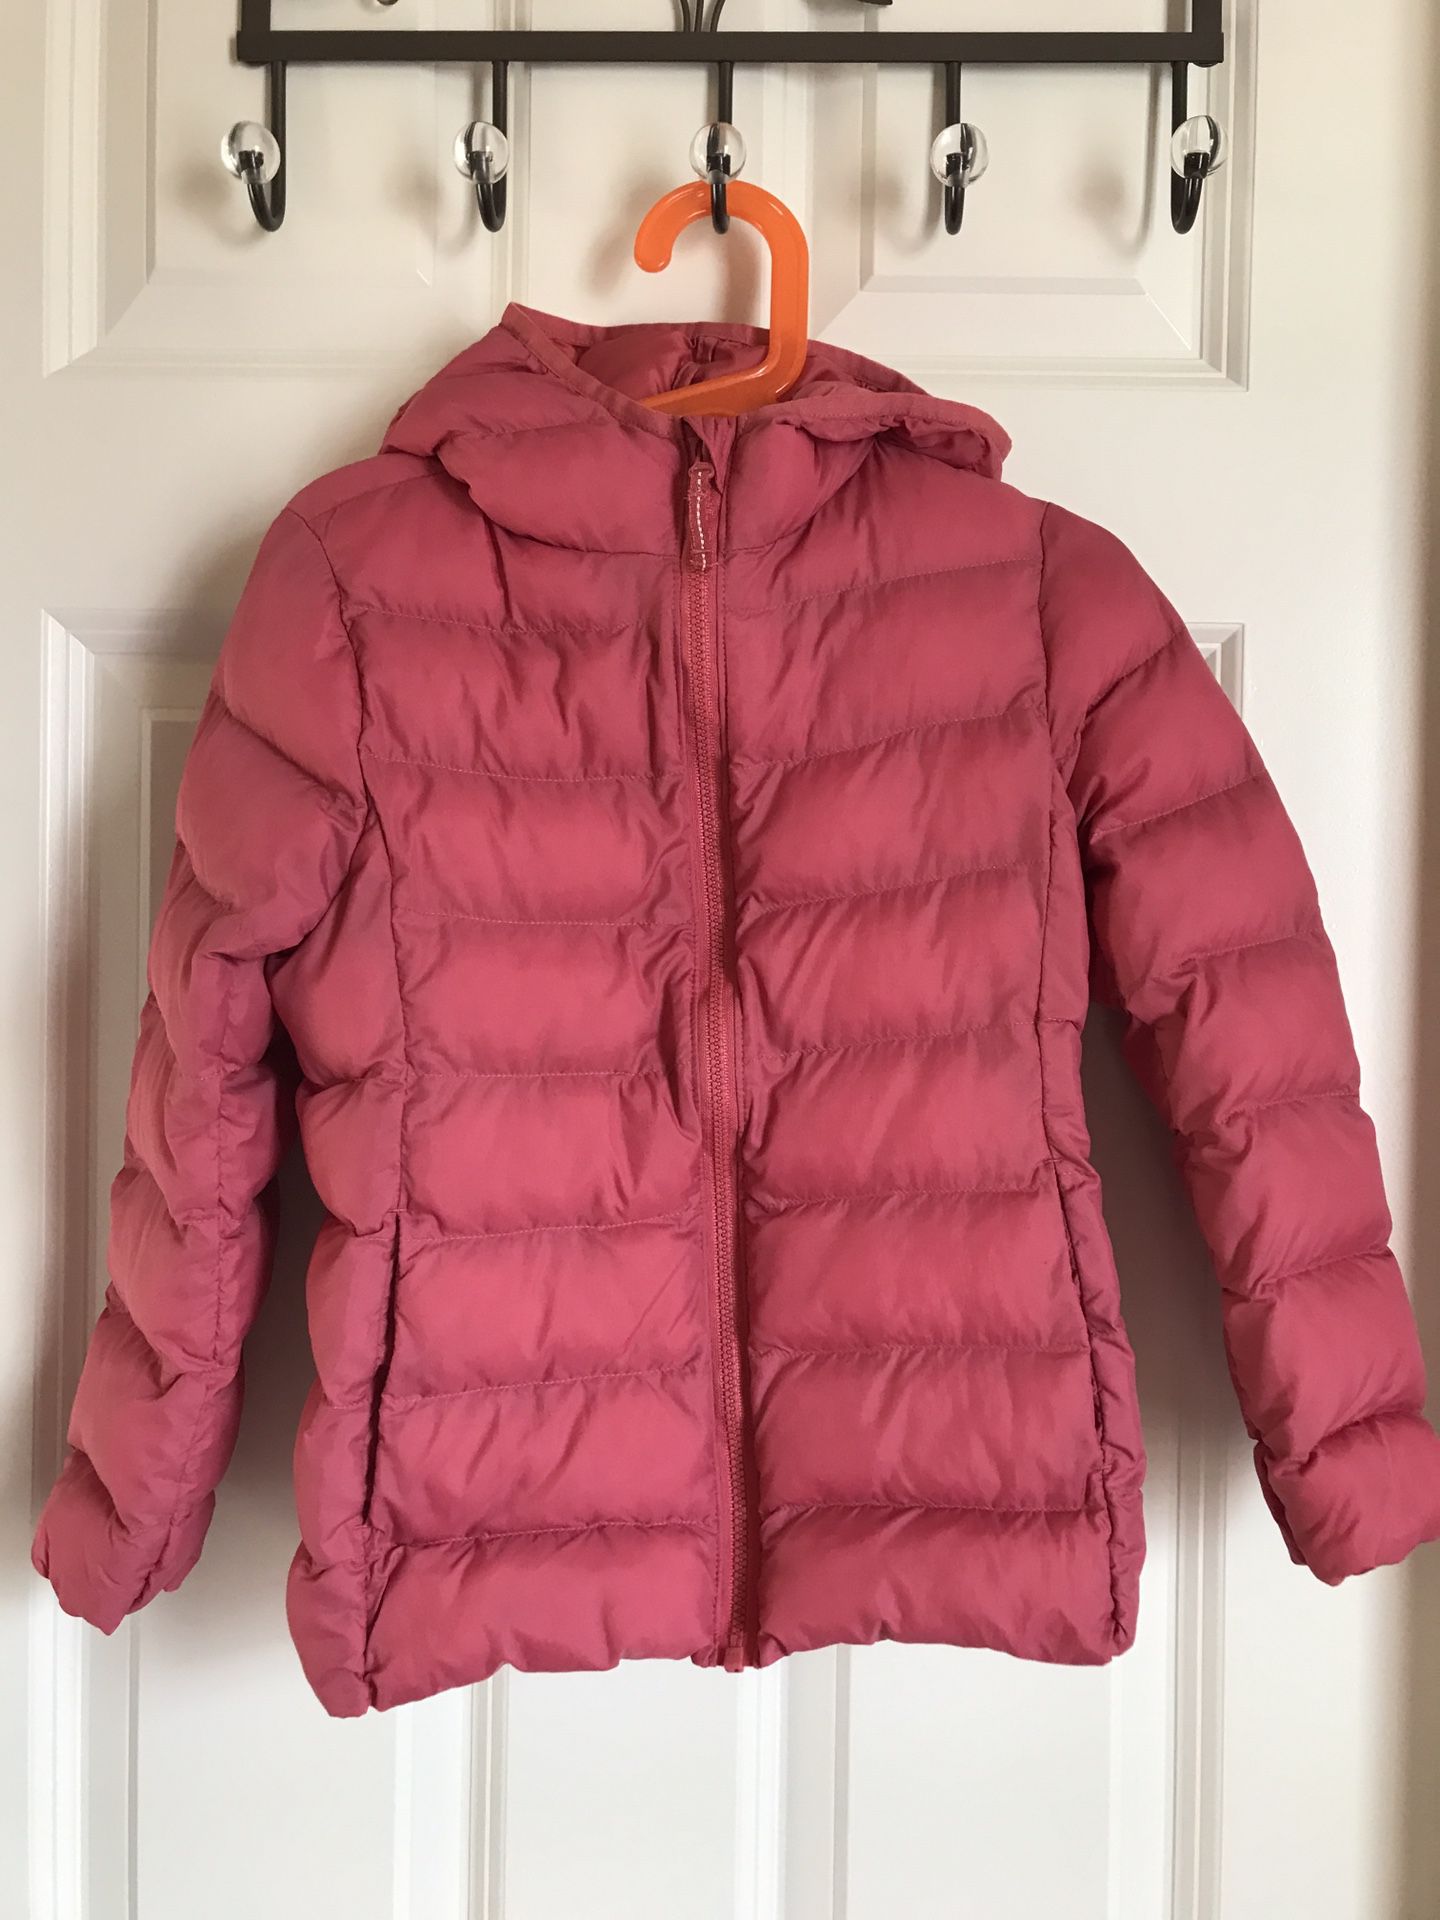 Pink Puffer Hooded Jacket Size 5T/6T